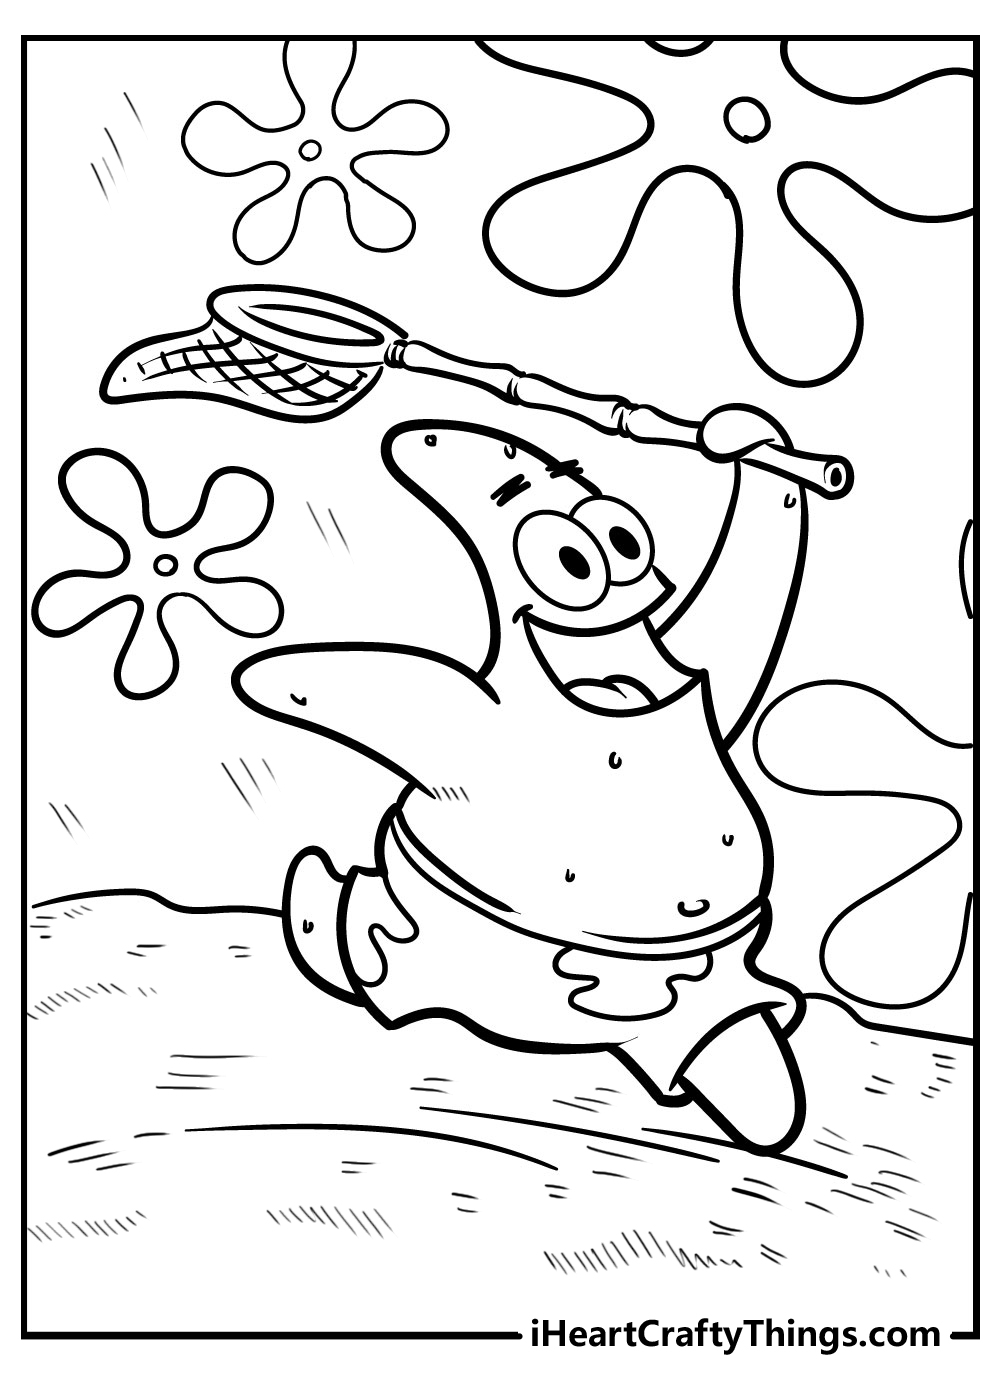 Patrick and Spongebob Coloring Pages - Cool Coloring Book